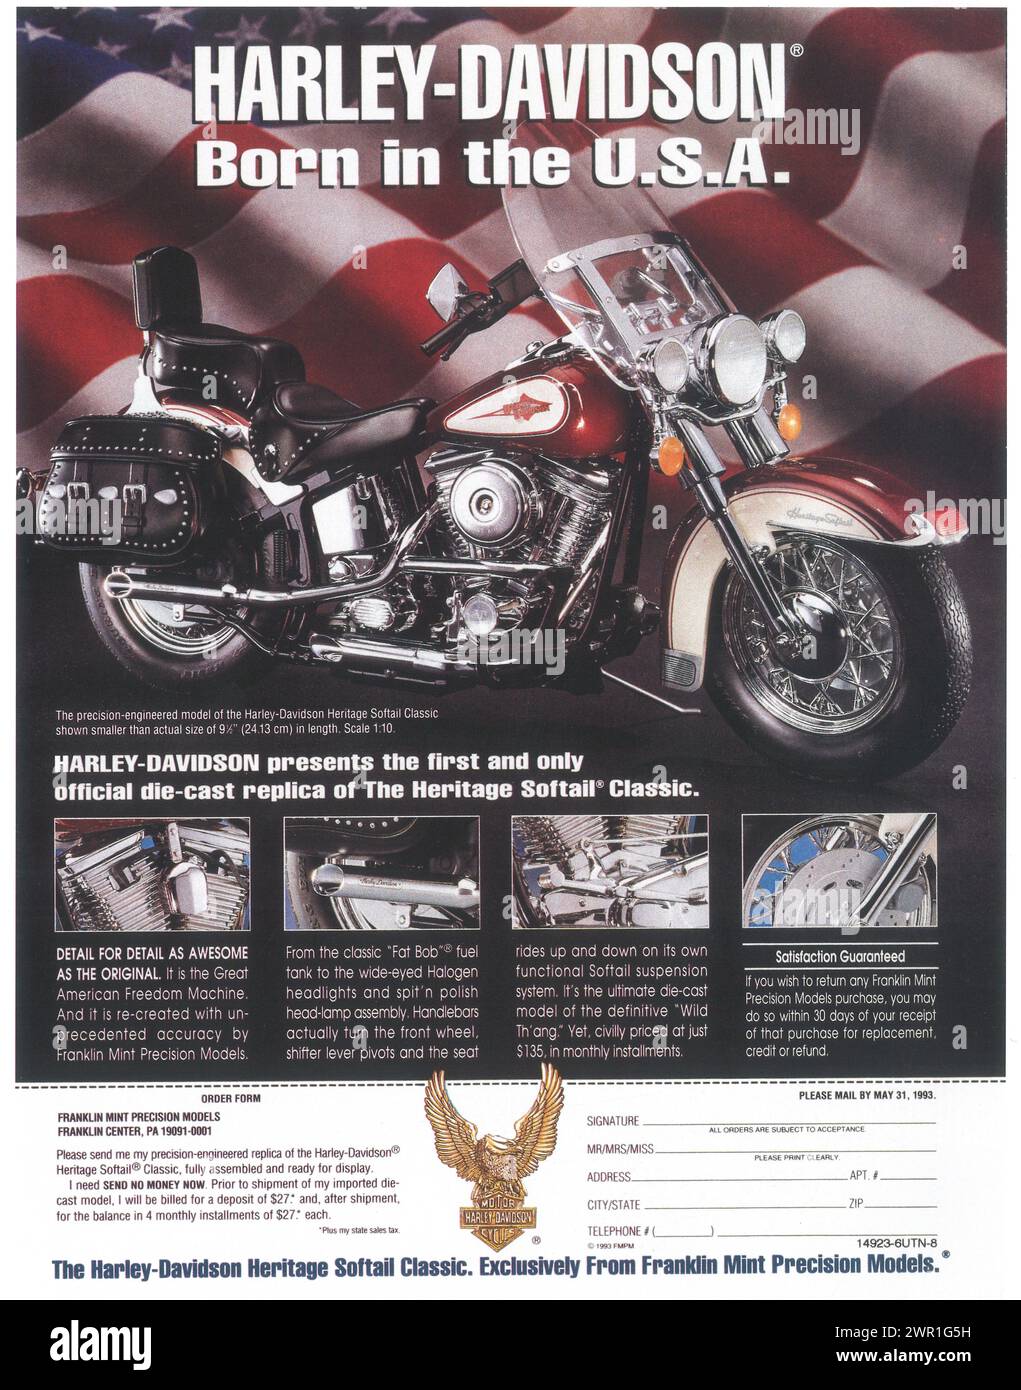 1994 Franklin Mint Print ad, Harley Davidson Heritage Softail Classic Motorcycle ad Banque D'Images